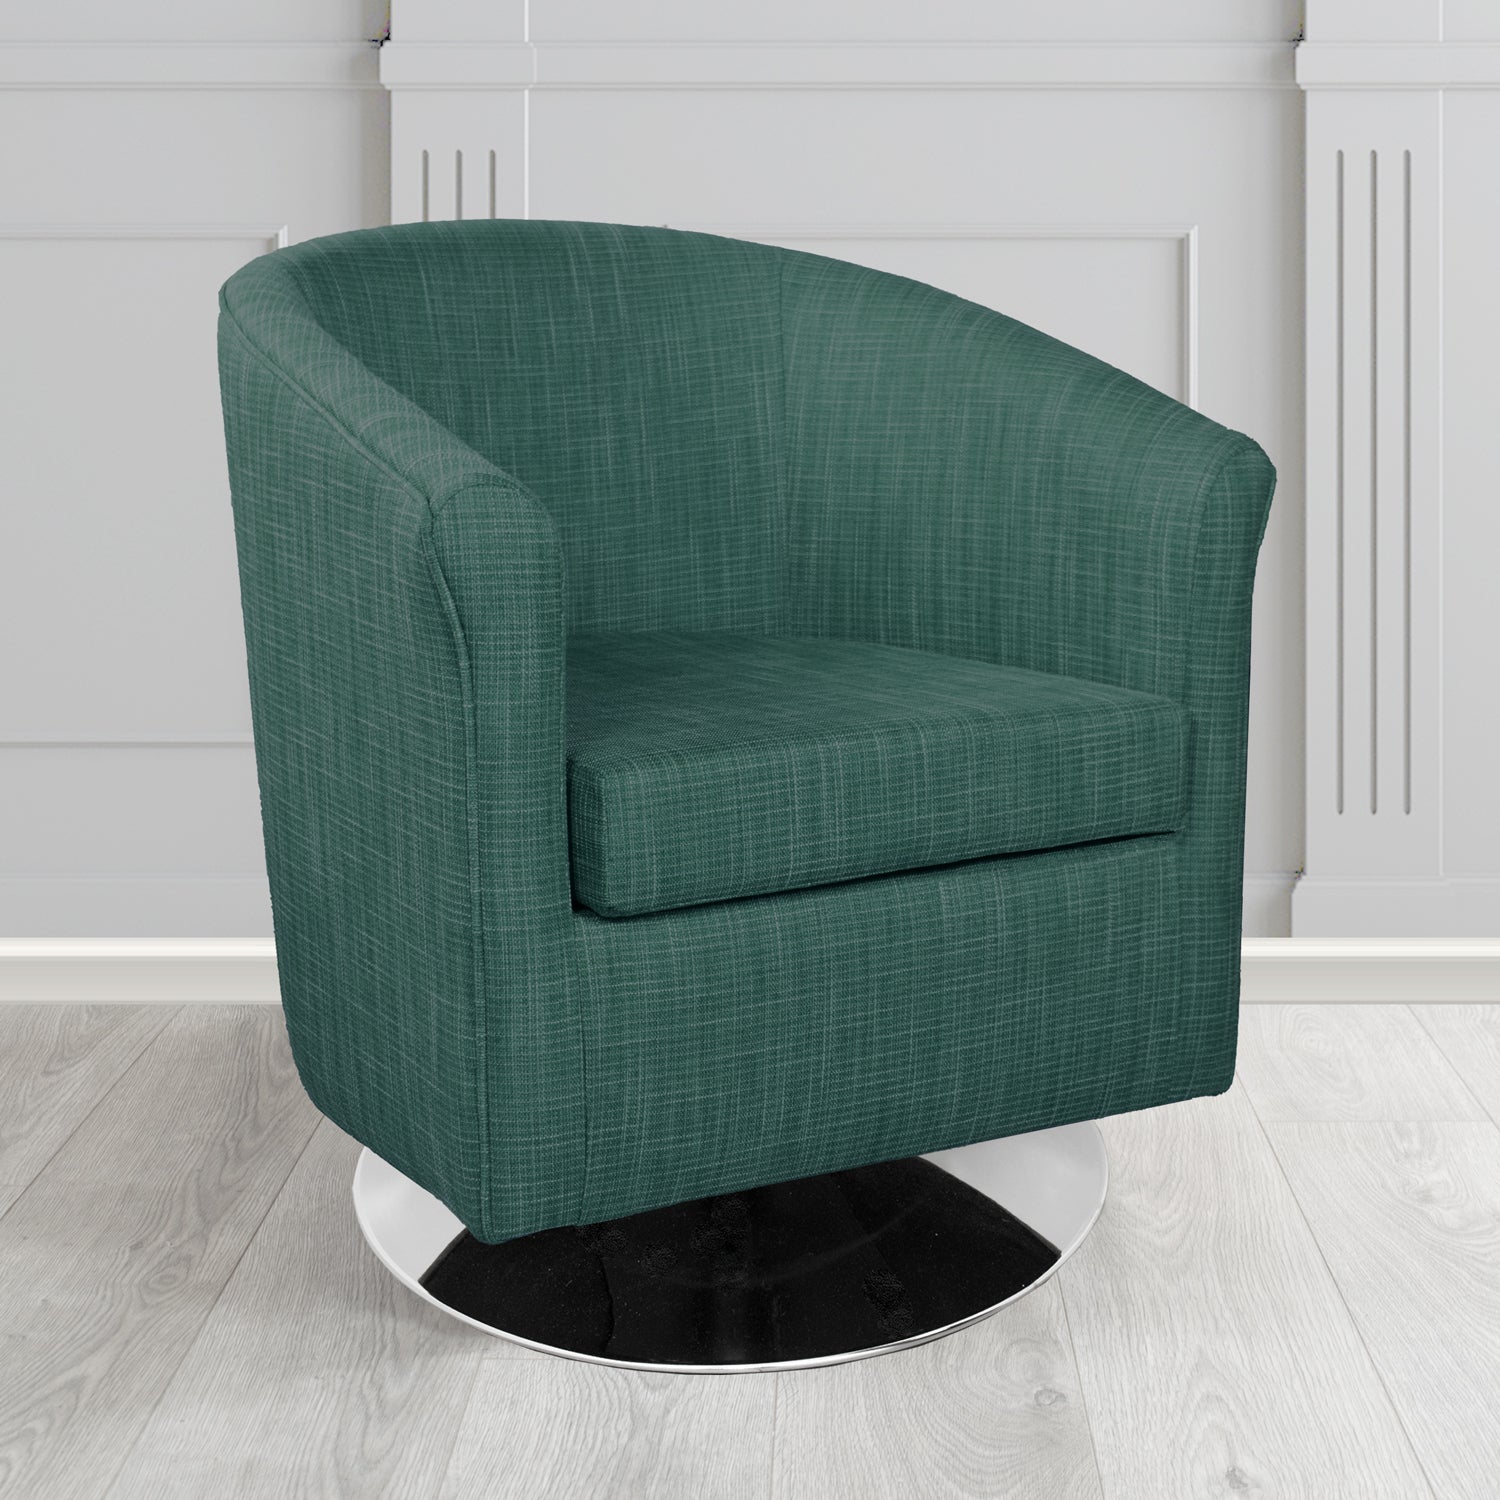 Tuscany Ravel Hosta Contract Crib 5 Fabric Swivel Tub Chair - Antimicrobial & Water-Resistant - The Tub Chair Shop